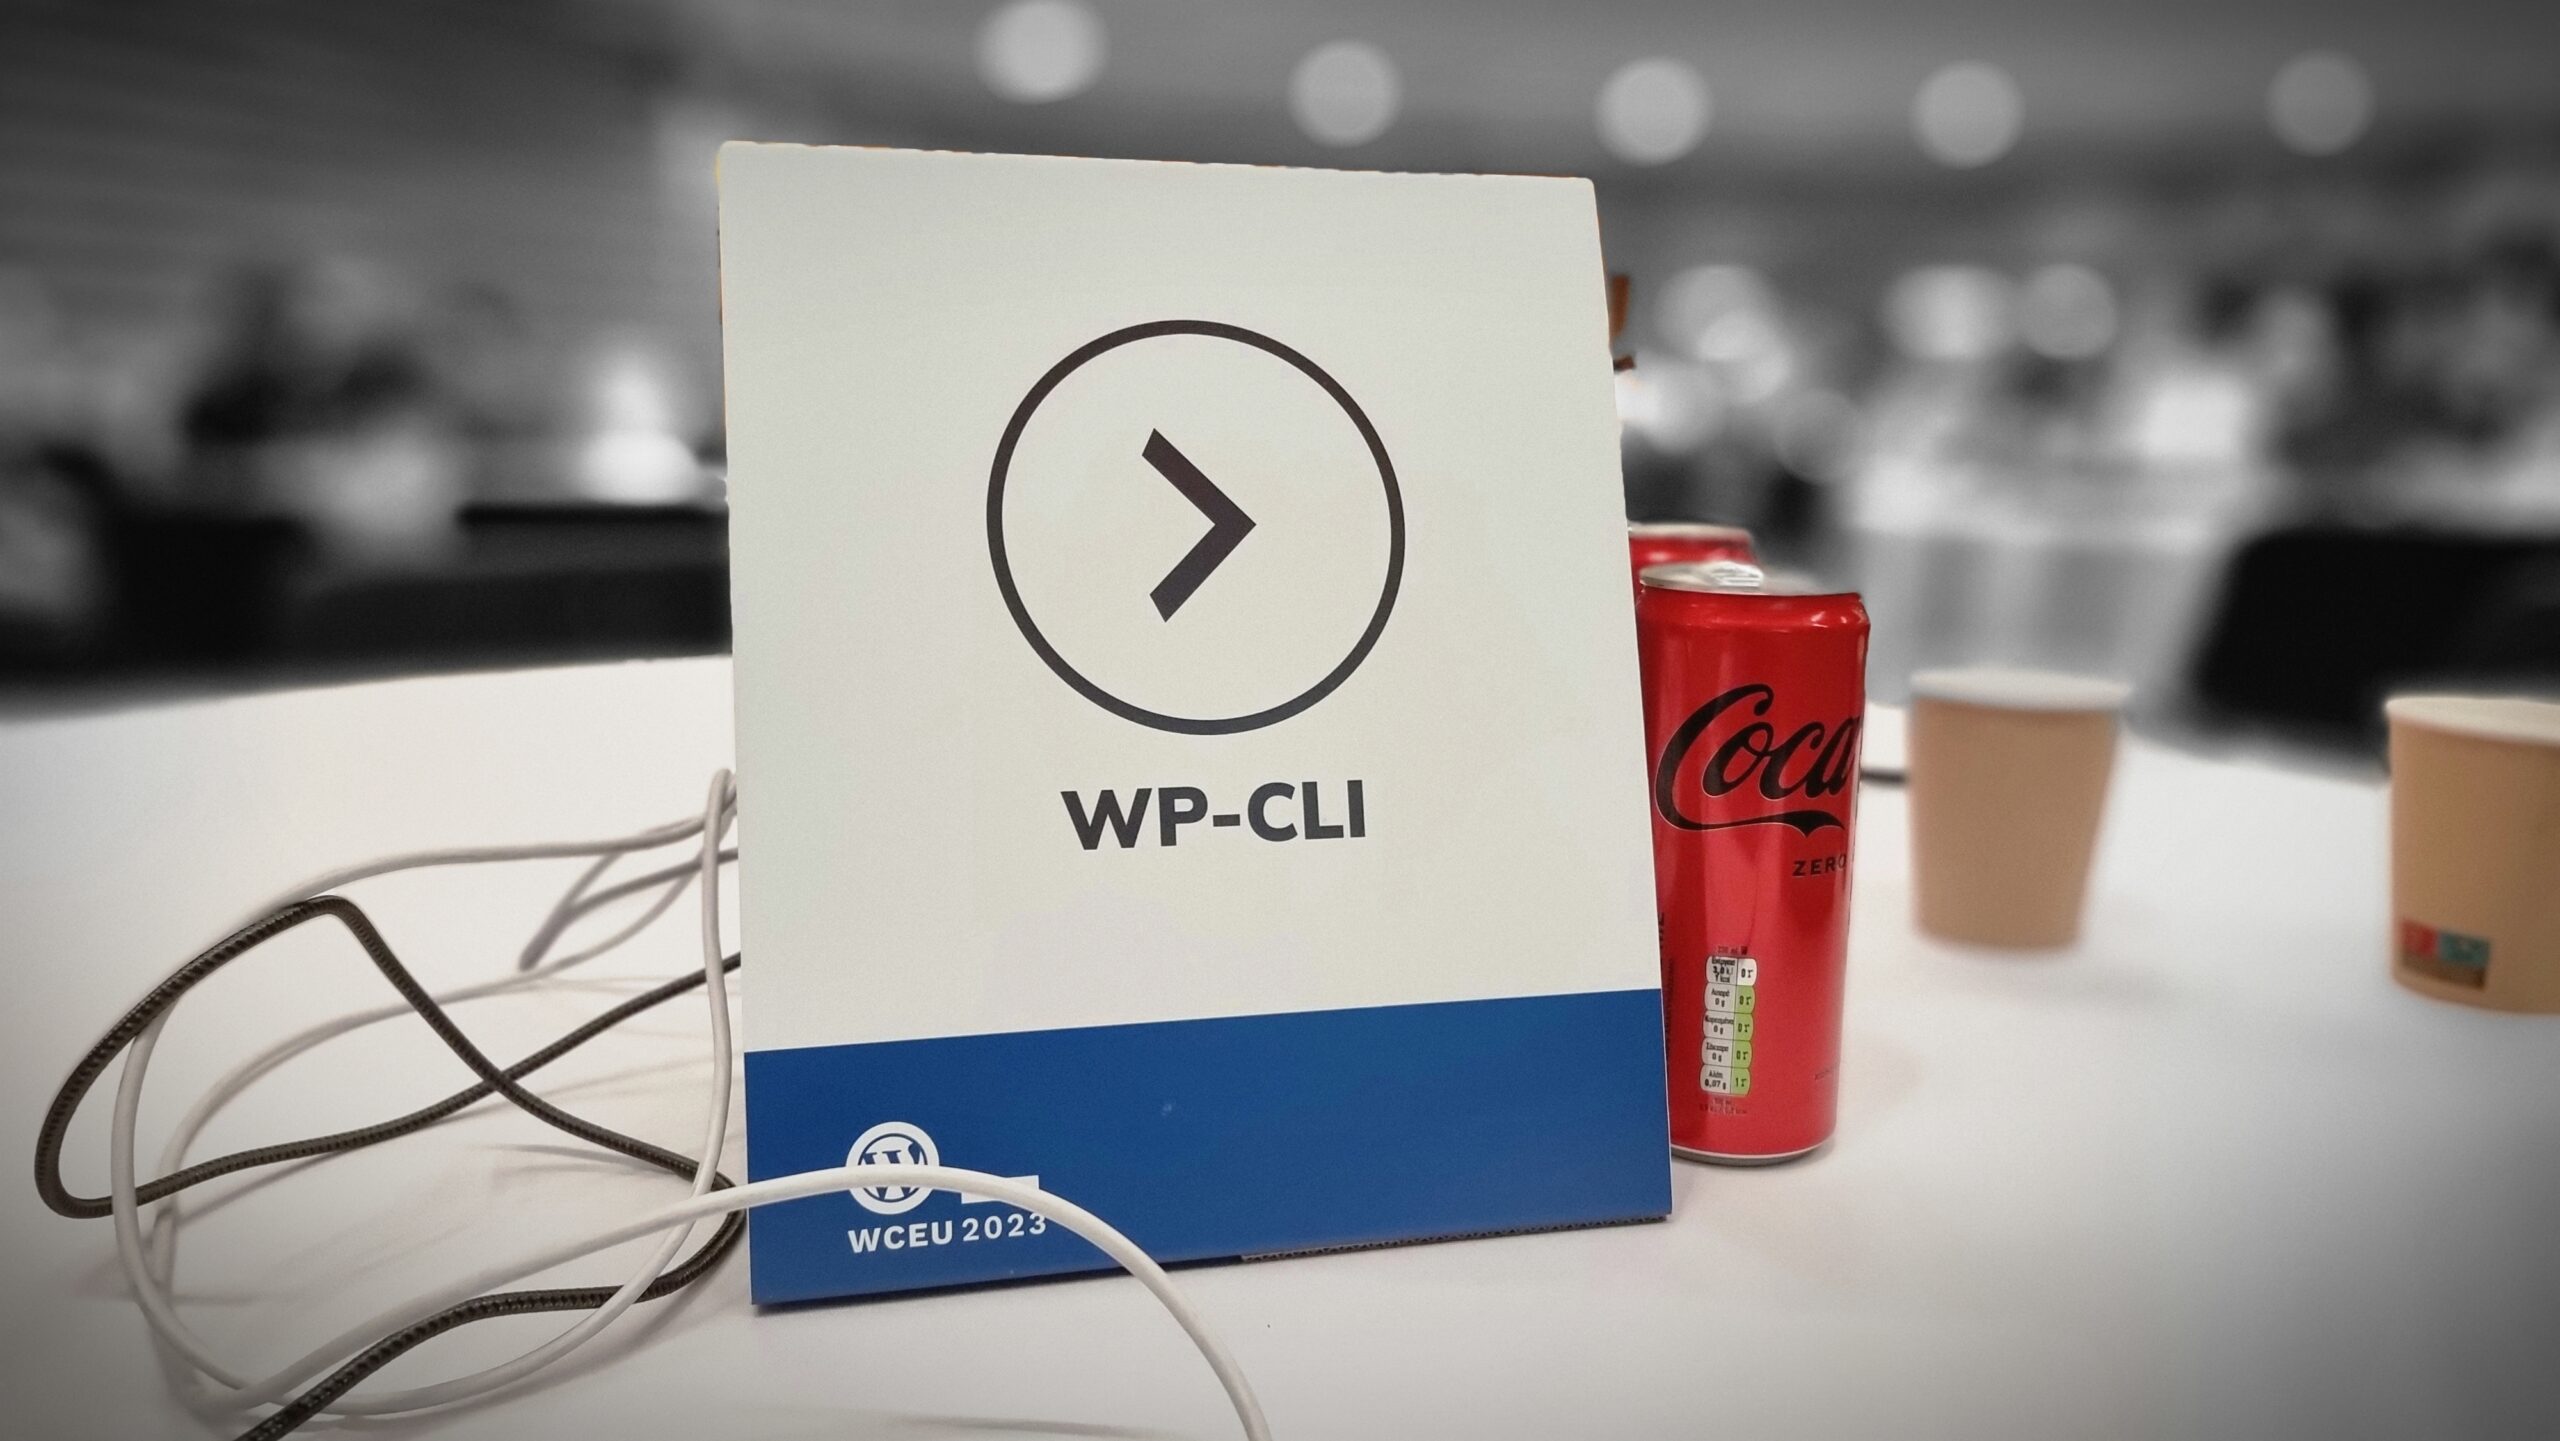 A table placeholder labelled "WP-CLI". It and s handful of Coke cans and disposable coffee cups are picked-out in colour on an otherwise monochrome and blurred picture.